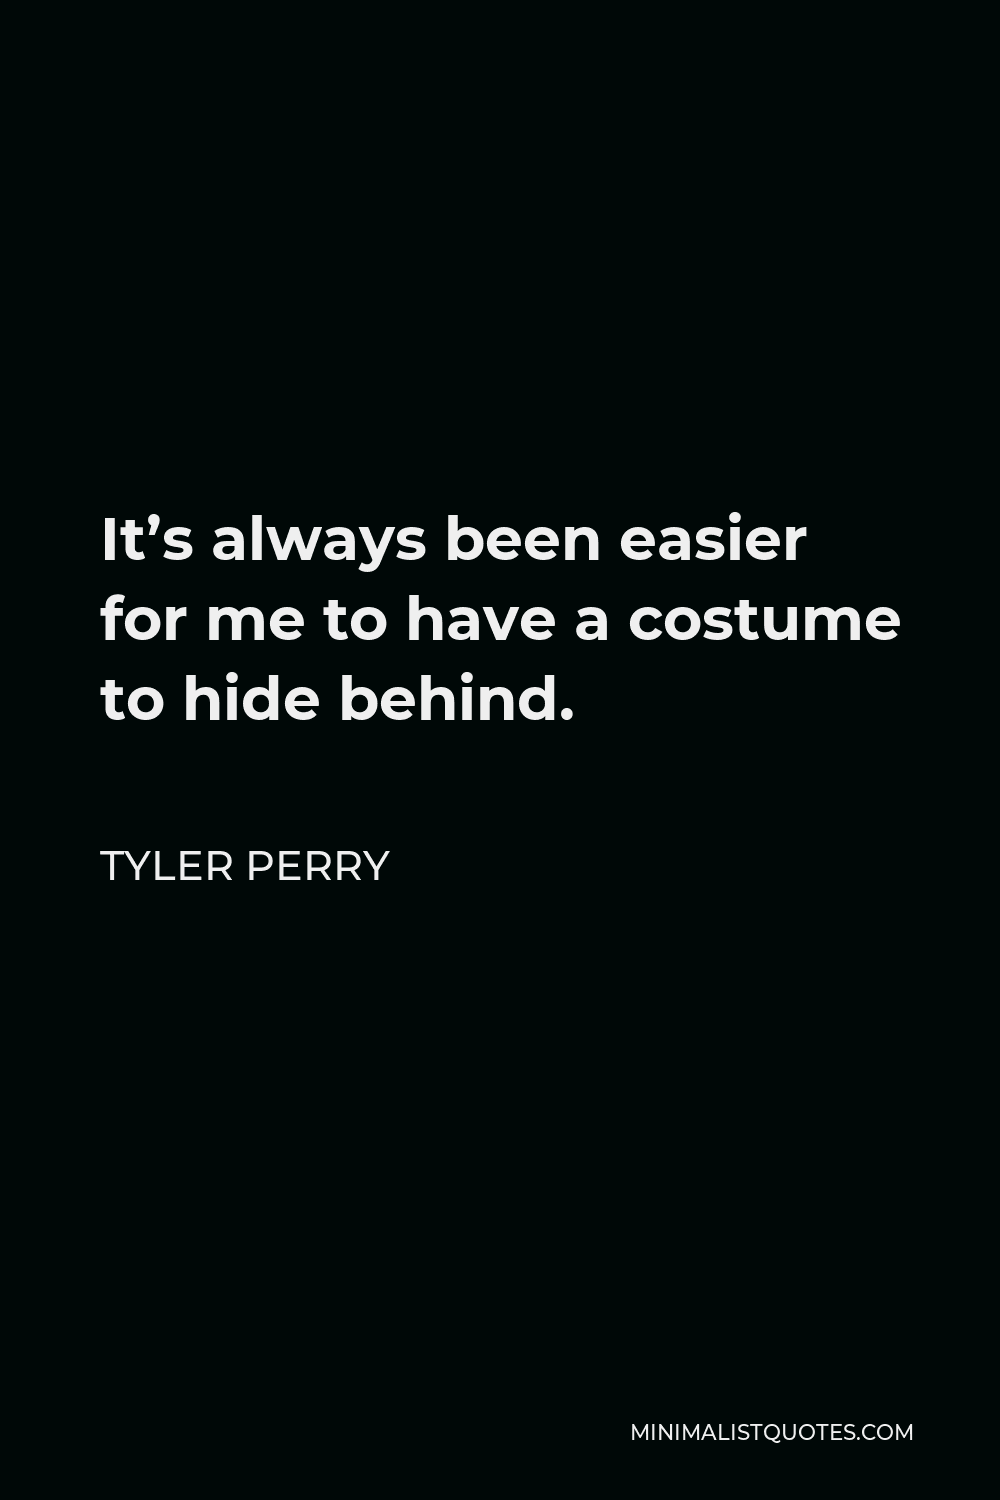 Tyler Perry Quote - It’s always been easier for me to have a costume to hide behind.